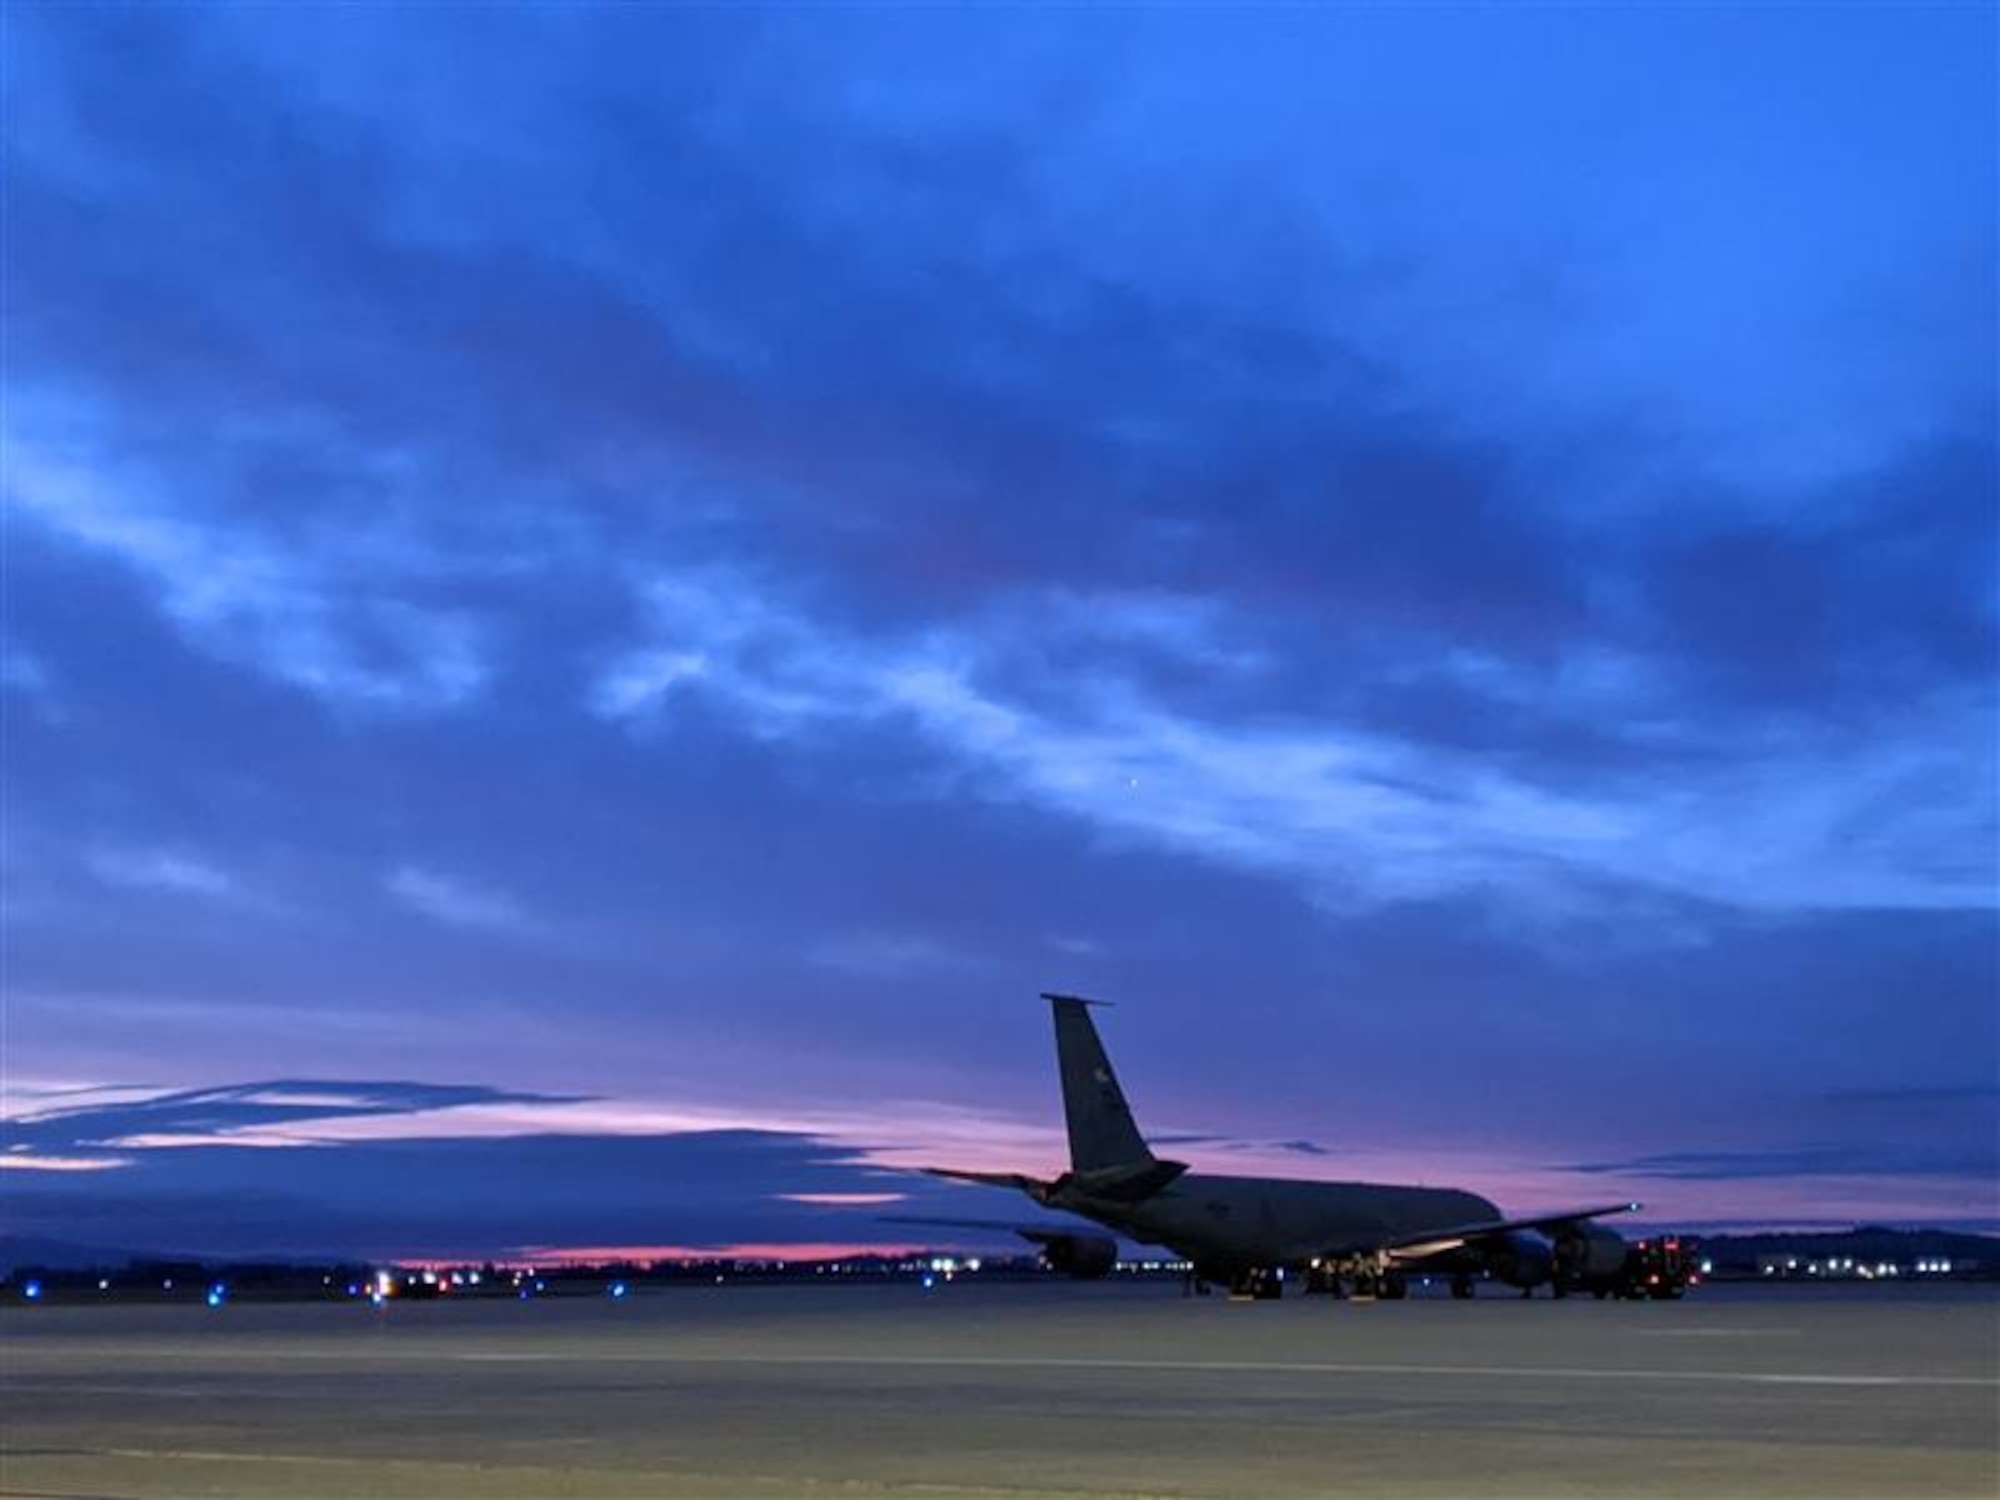 A U.S. Air Force KC-135 Stratotanker from the 92nd Air Refueling Wing takes off during a long-duration endurance sortie March 29-30, 2022. By having multi-day tanker mission generation capability KC-135 forces will have increased flexibility to detect and defeat threats to the U.S. (U.S. Air Force Courtesy Photo)